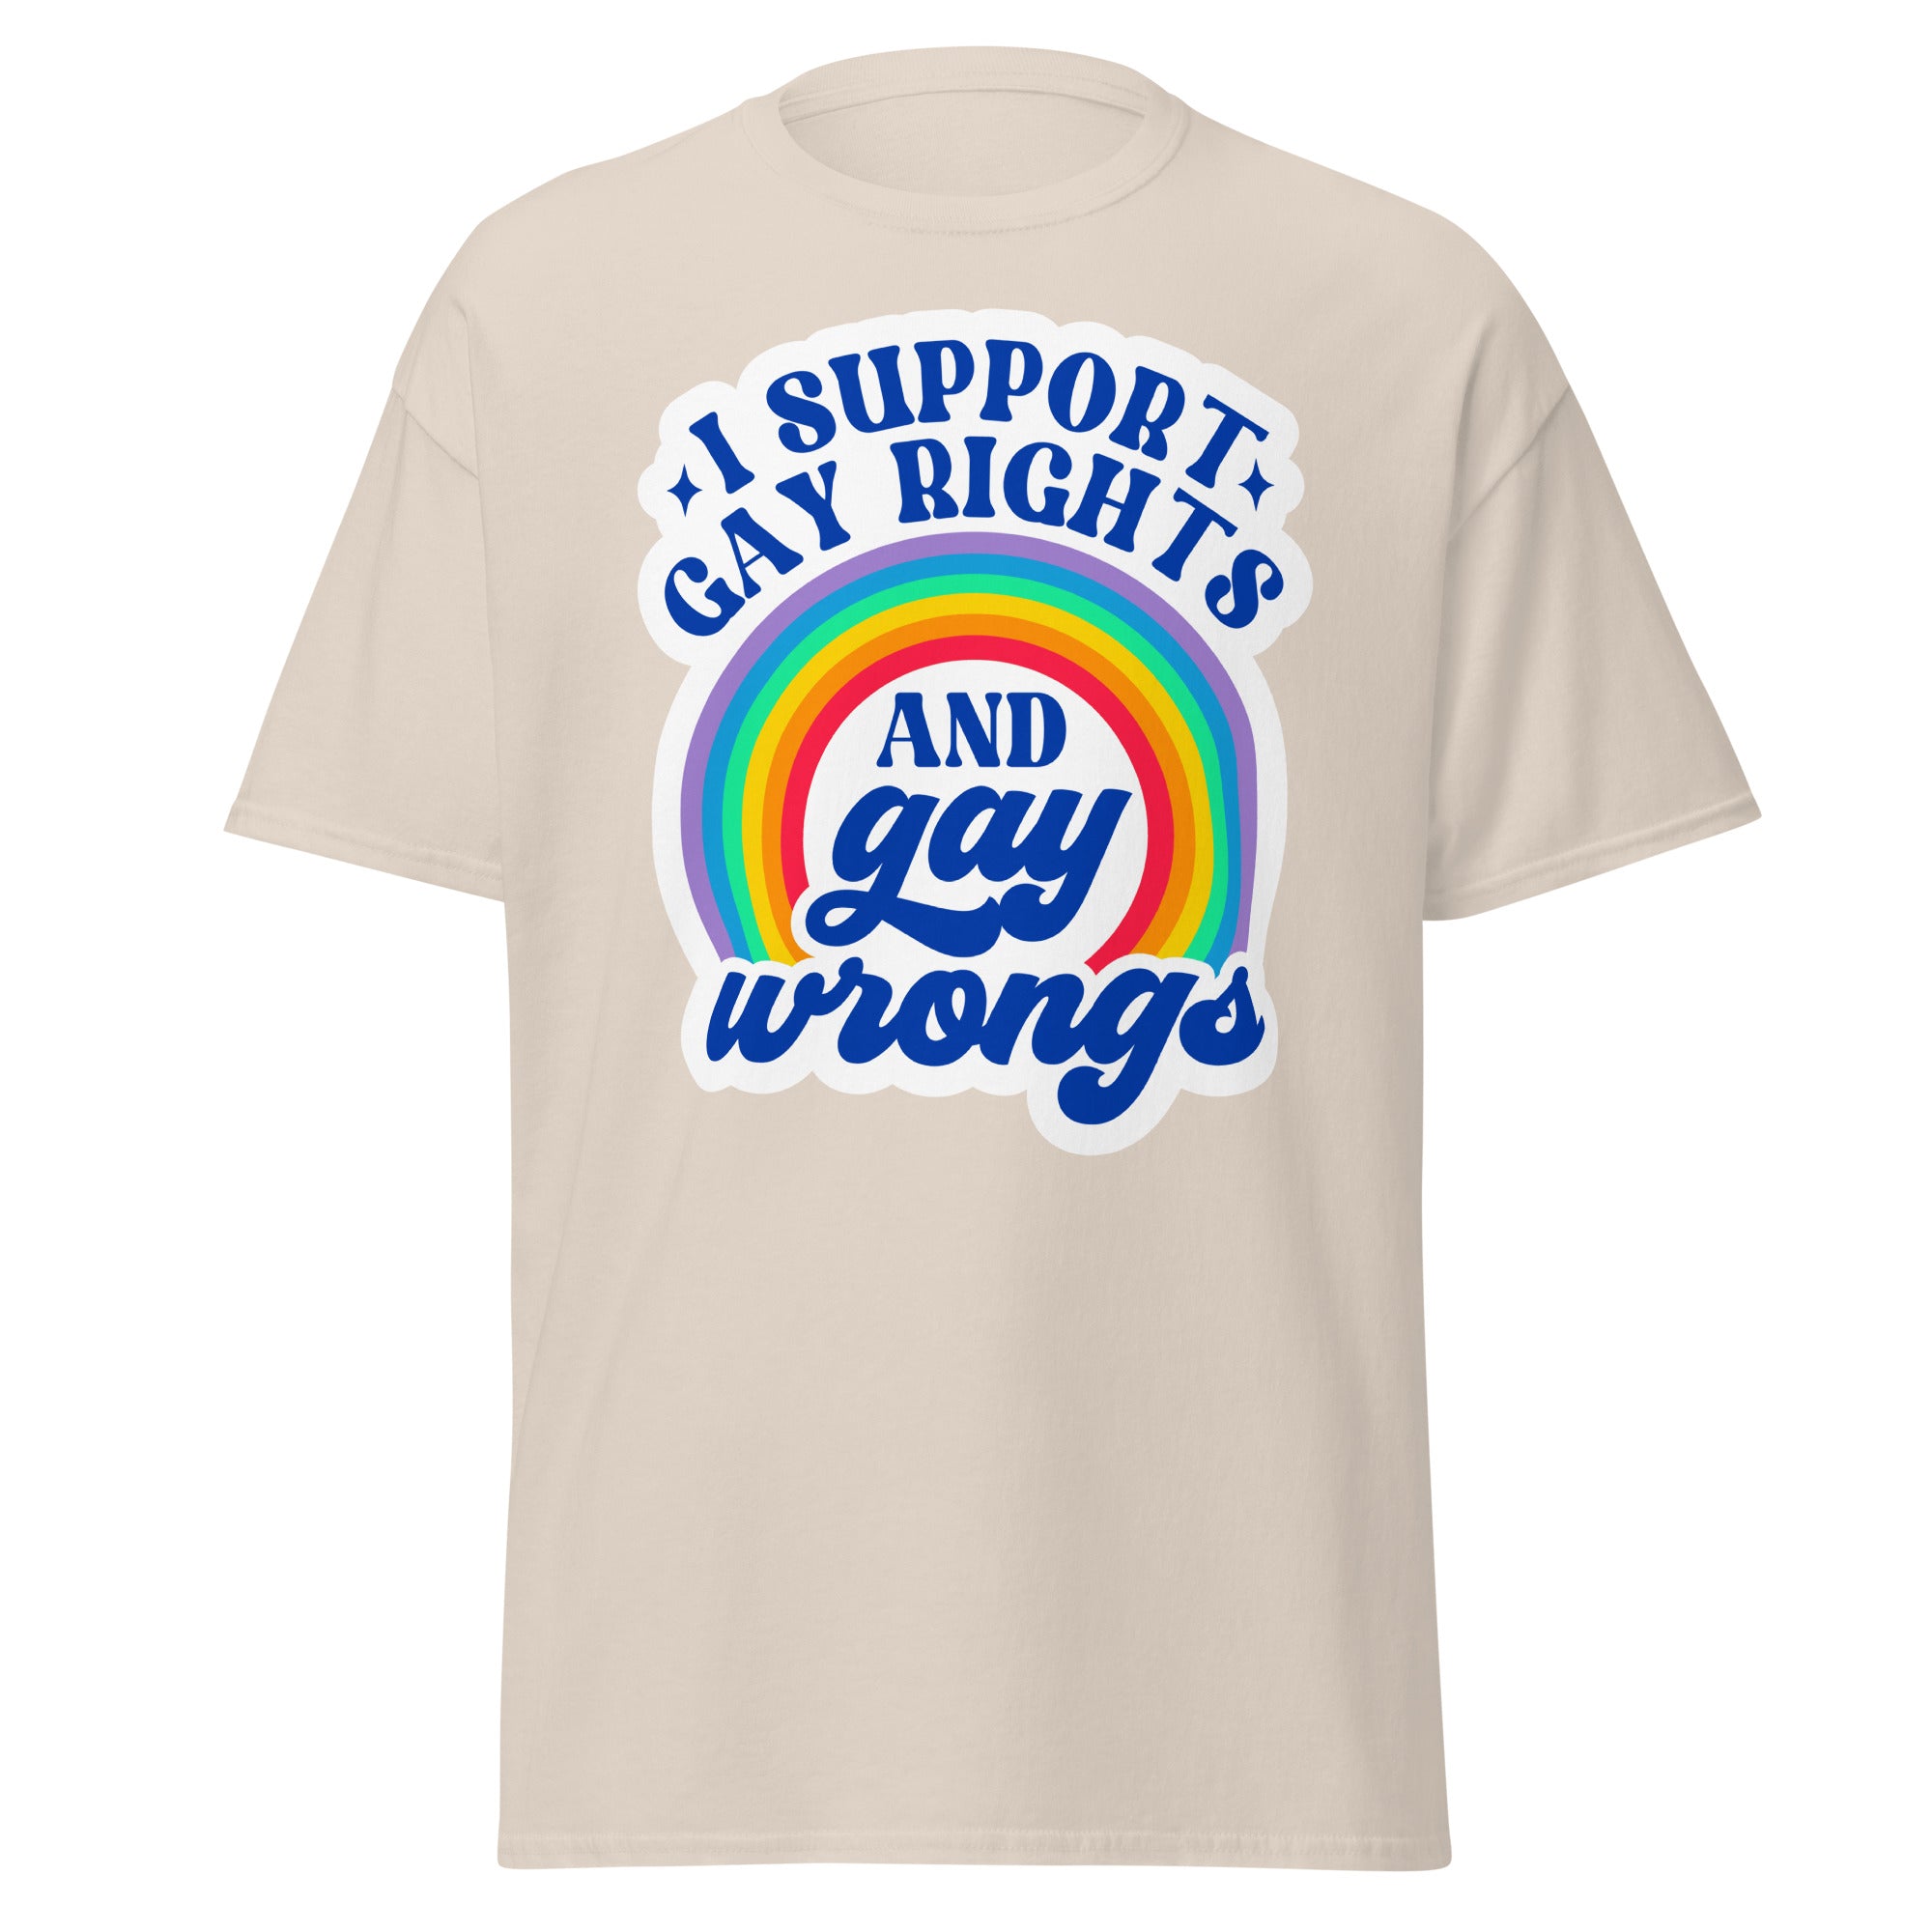 I SUPPORT GAY RIGHTS AND gay wrongs Unisex T Shirt